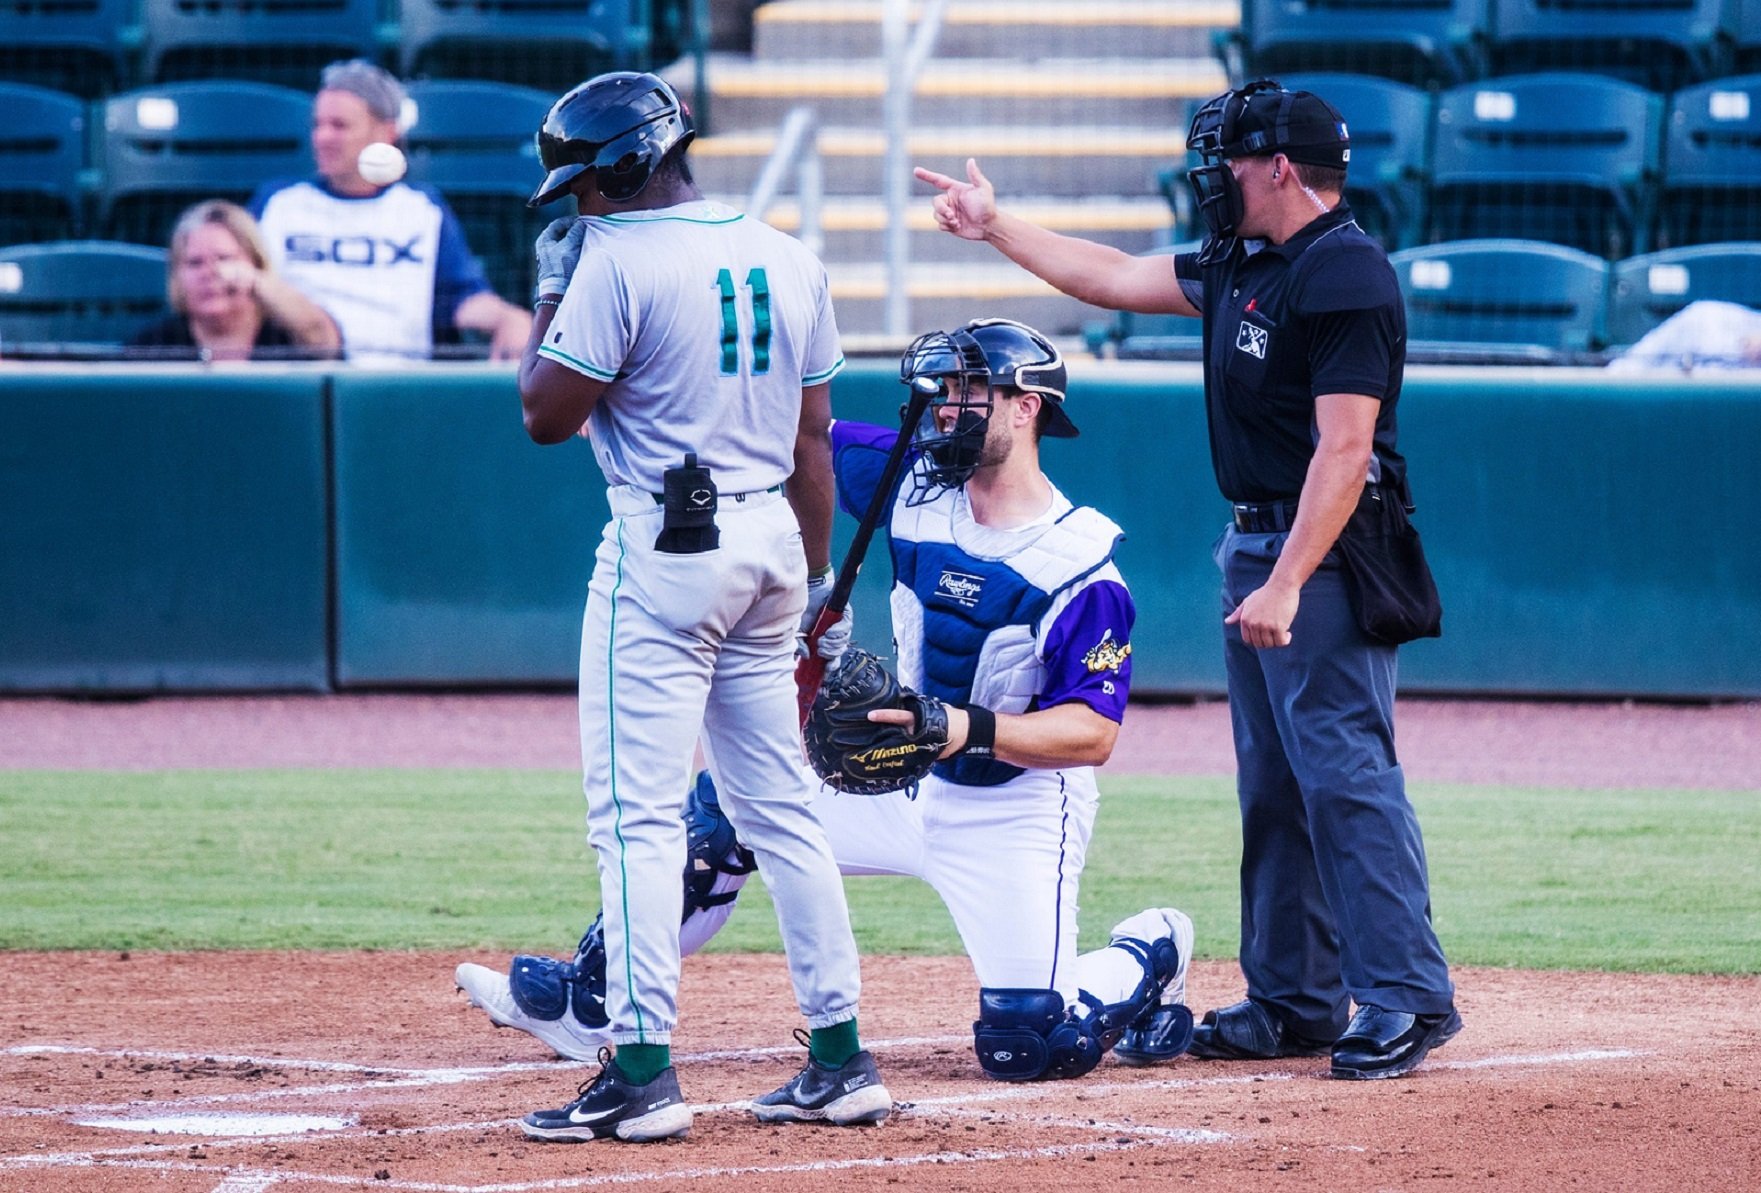 Minor League Umpires To Receive Significant Pay Raise In 2022